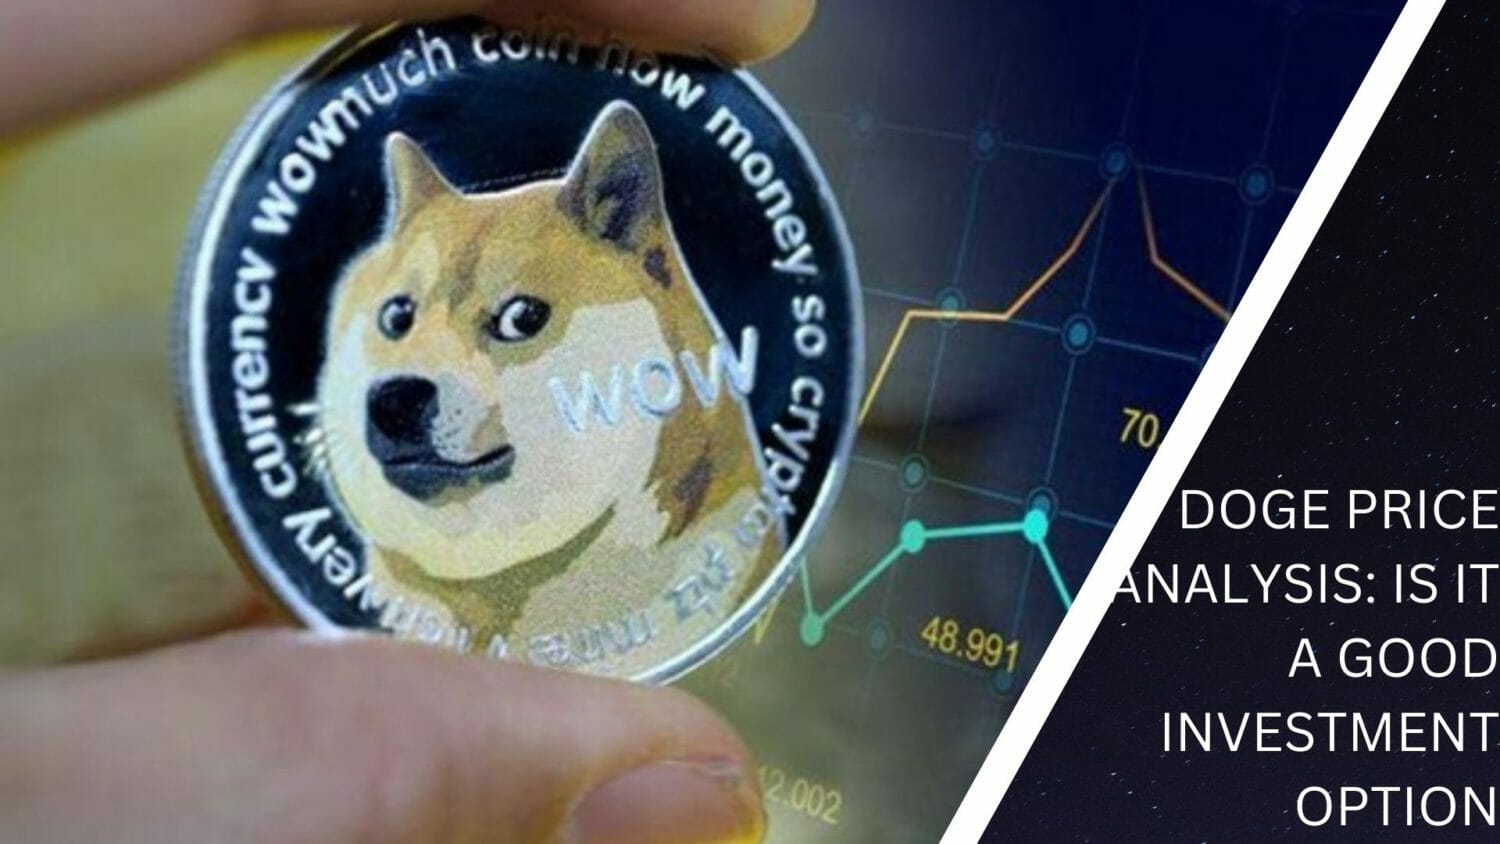 Doge Price Analysis: Is It A Good Investment Option